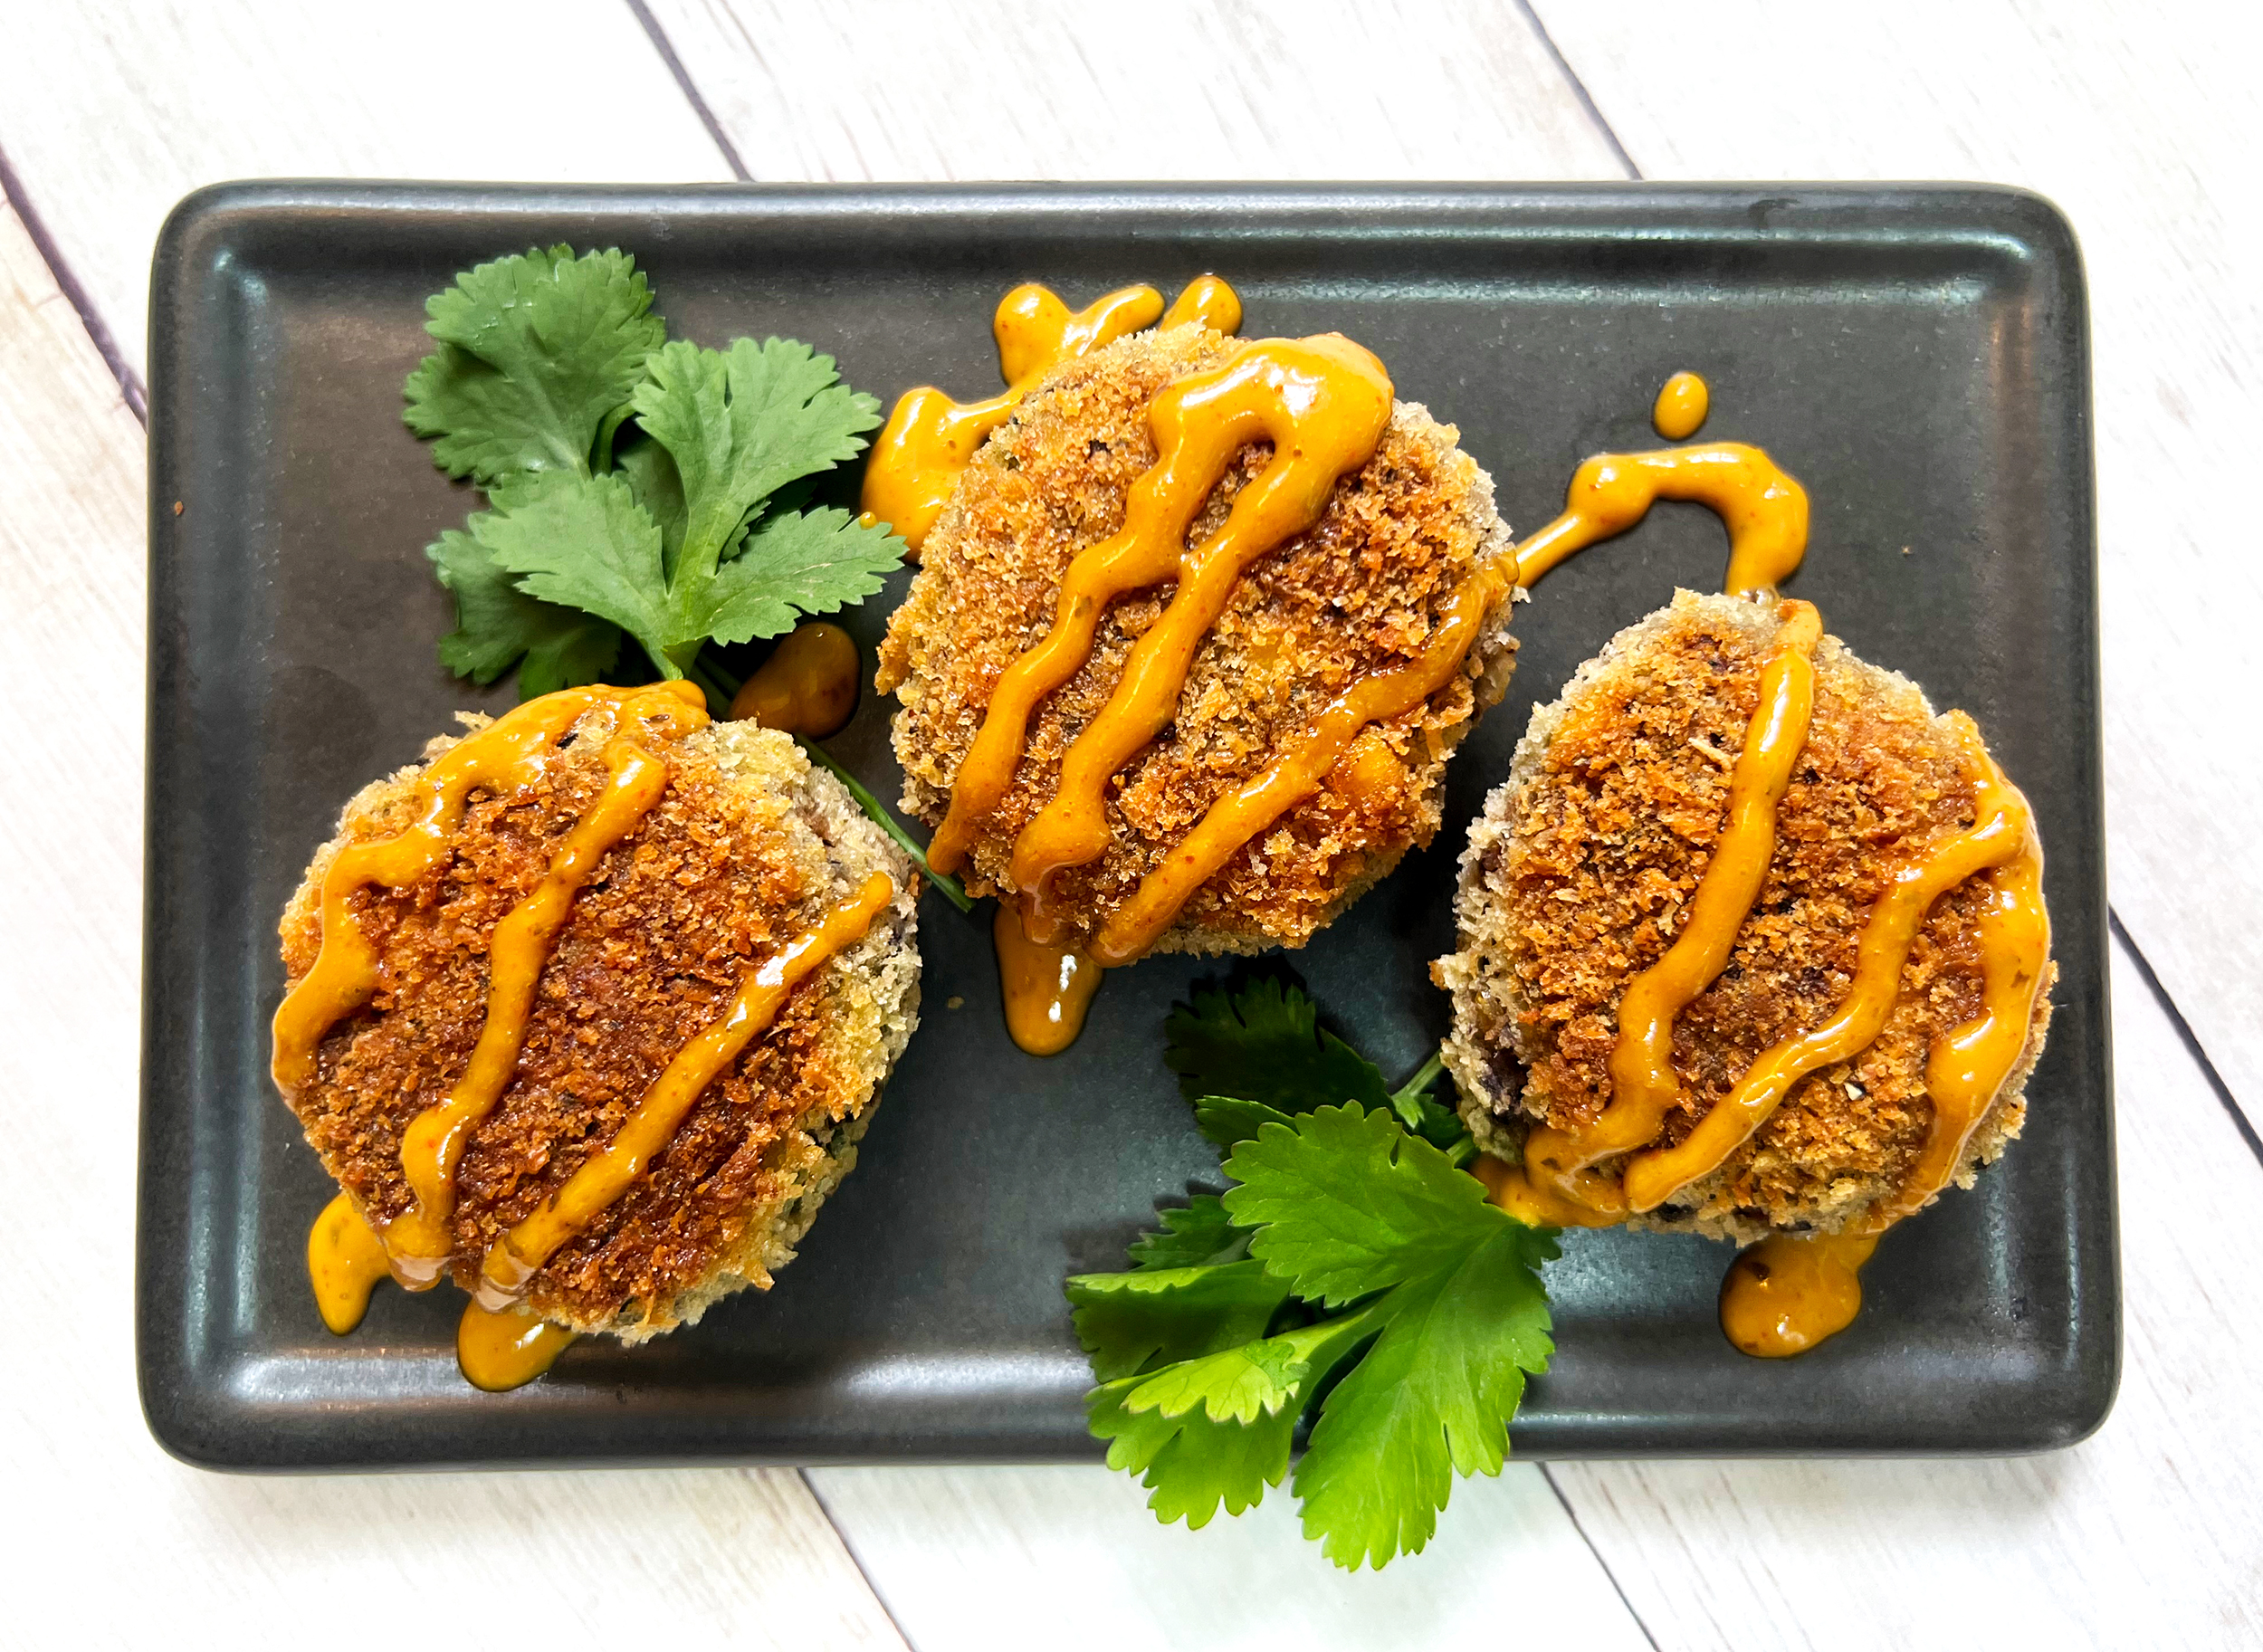 SPICY BLACK BEAN CAKES TOPPED WITH YUMM SAUCE 